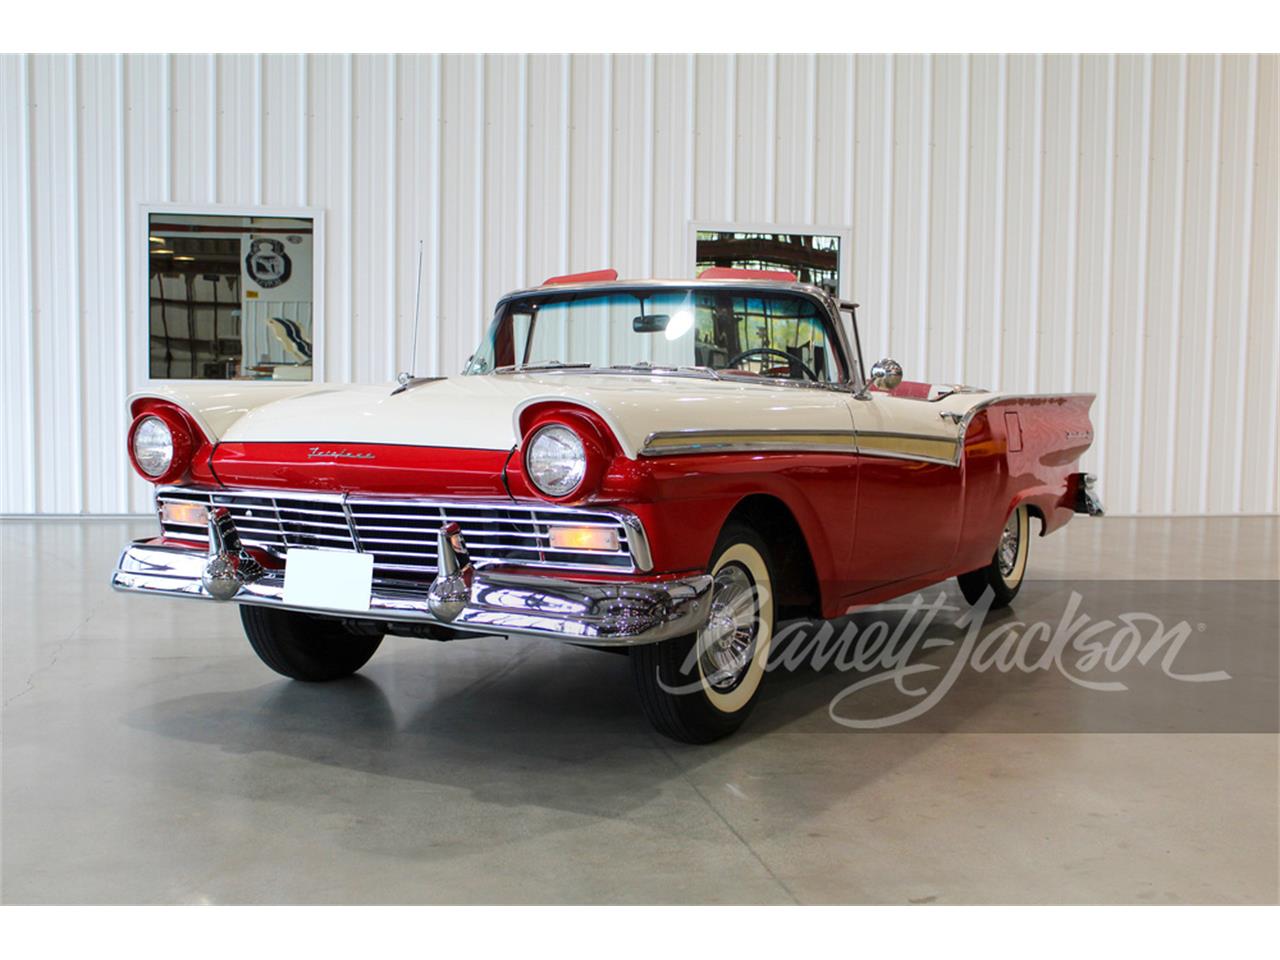 For Sale at Auction: 1957 Ford Fairlane 500 in Scottsdale, Arizona for sale in Scottsdale, AZ